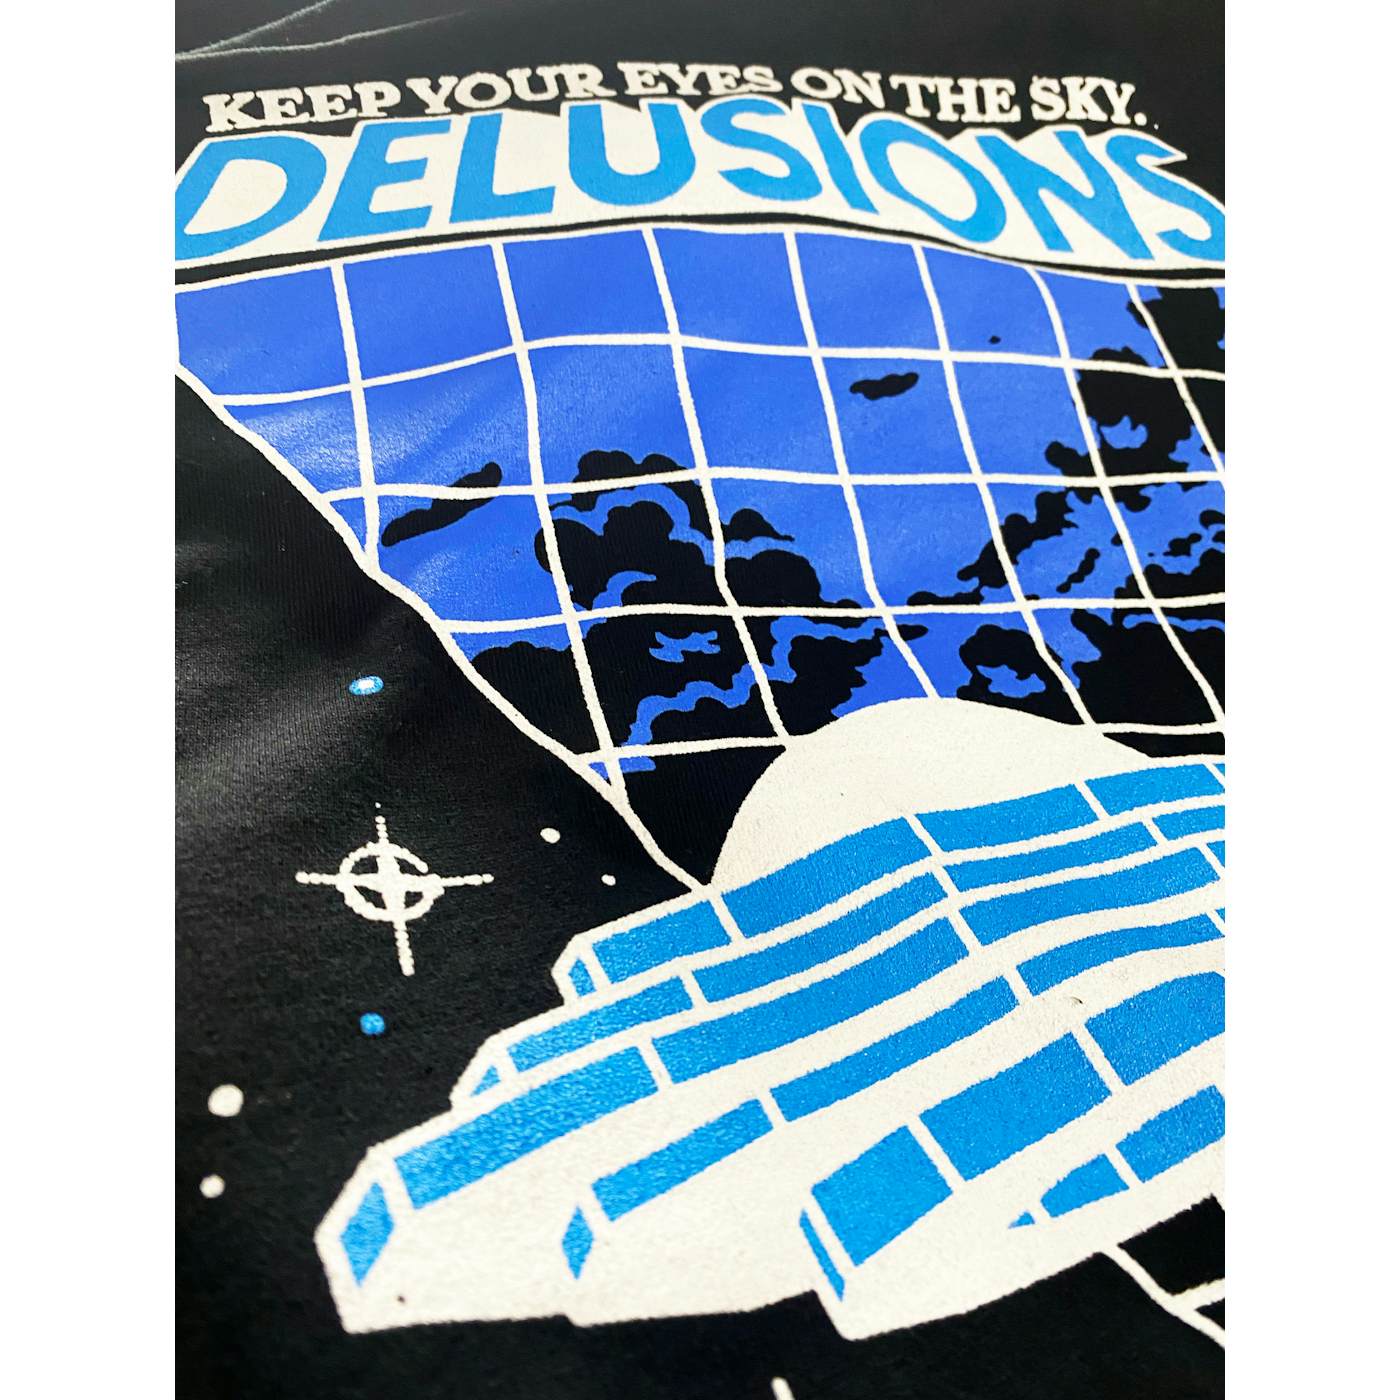 Tiny Meat Gang Delusions Expansion Black Hoodie (Blue Print)